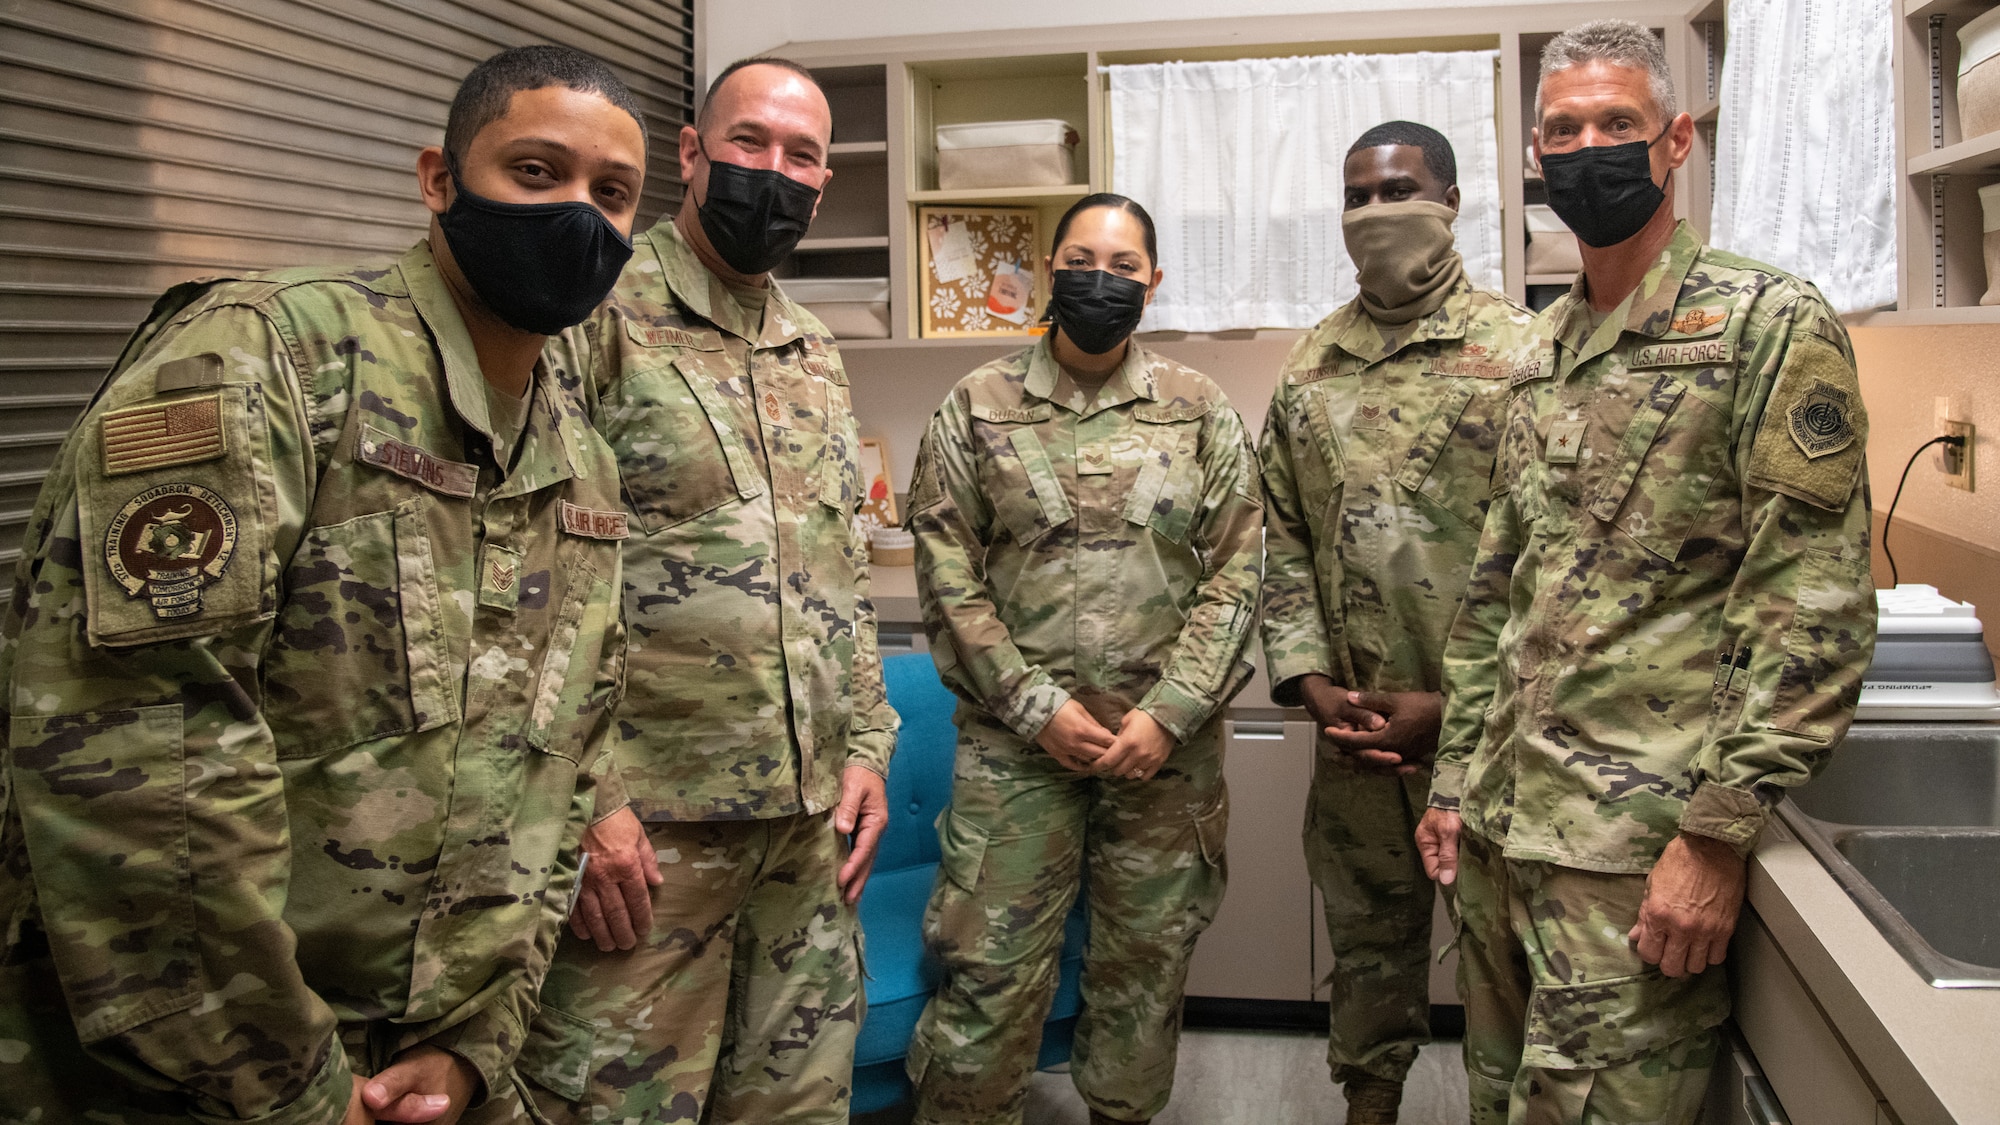 Airmen pose with 56th Fighter Wing leadership in the Detachment 12 lactation room Sept. 17, 2021, at Luke Air Force Base, Arizona. Staff Sgt. Kasandra Duran, center, 372nd Training Squadron Det 12 F-35A Lightning II weapons instructor, aided in the creation of the room, which supports lactating mothers by providing items such as hot running water, low lighting to help mothers relax, cleaning supplies and a changing table. The newly revived lactation room helps support Airmen and their families by enhancing facilities and equipment to support combat-ready Airmen. (U.S. Air Force photo by Staff Sgt. Collette Brooks)